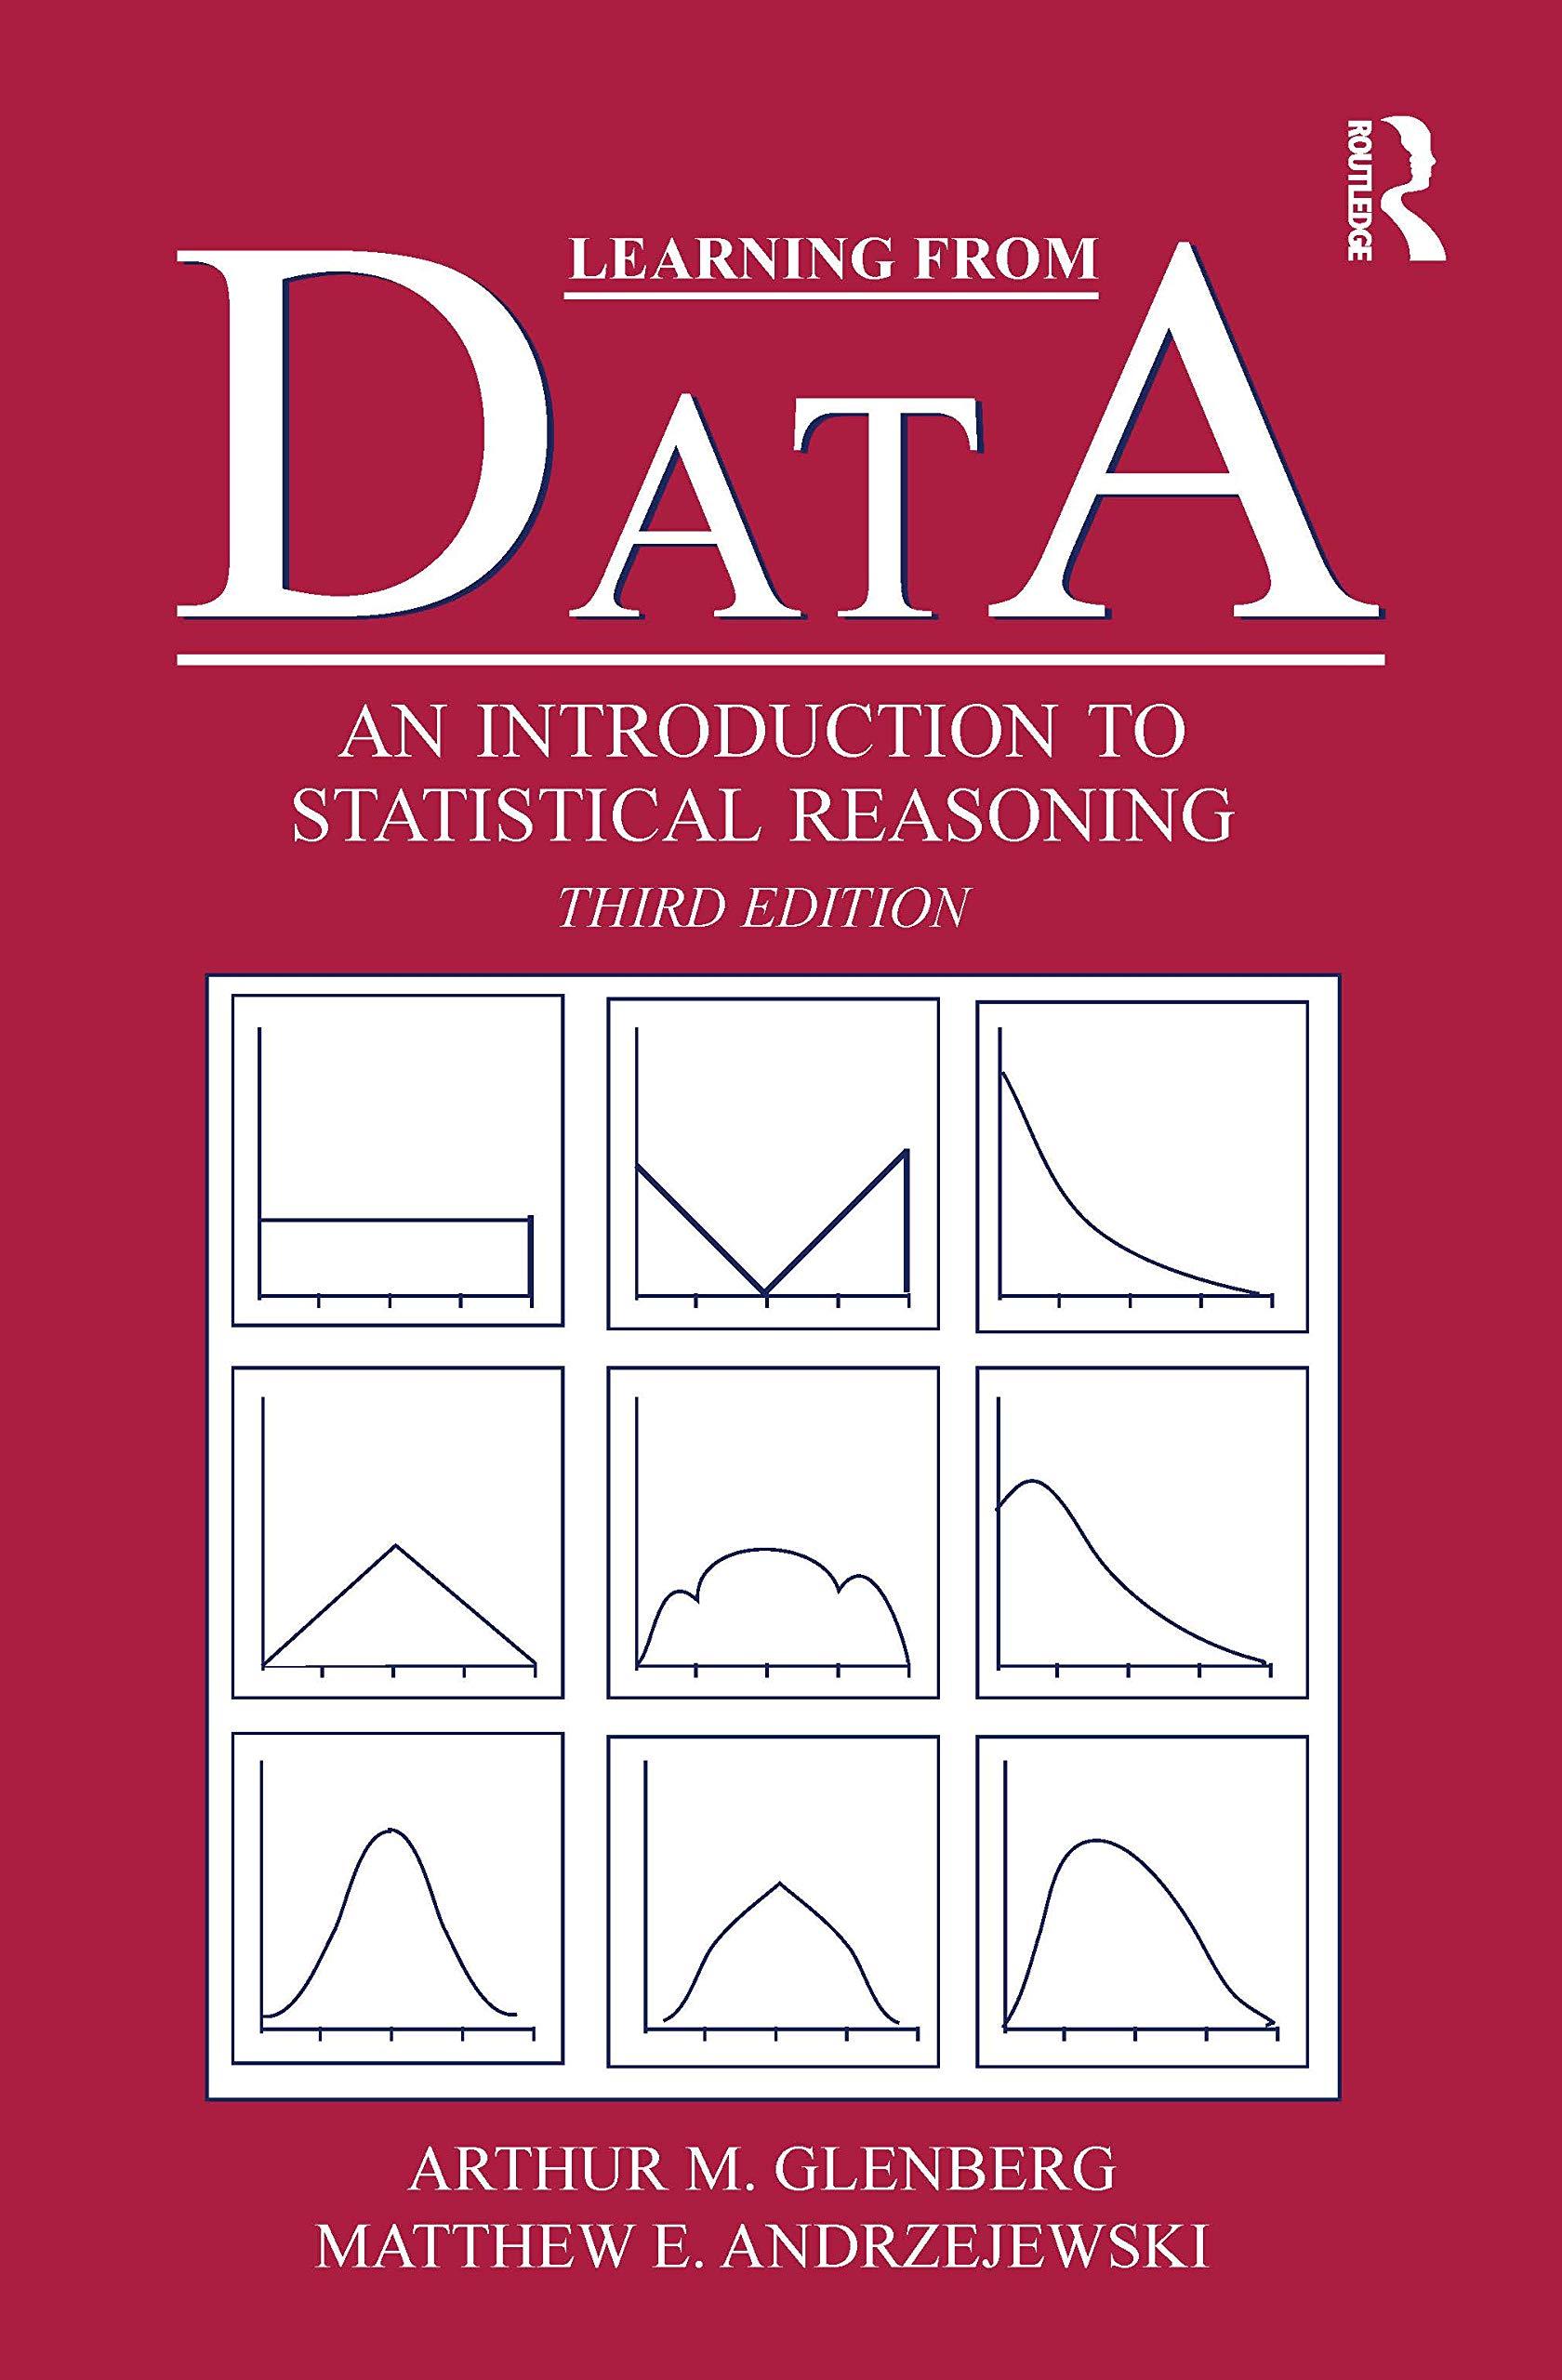 learning from data an introduction to statistical reasoning 3rd edition arthur glenberg, matthew andrzejewski